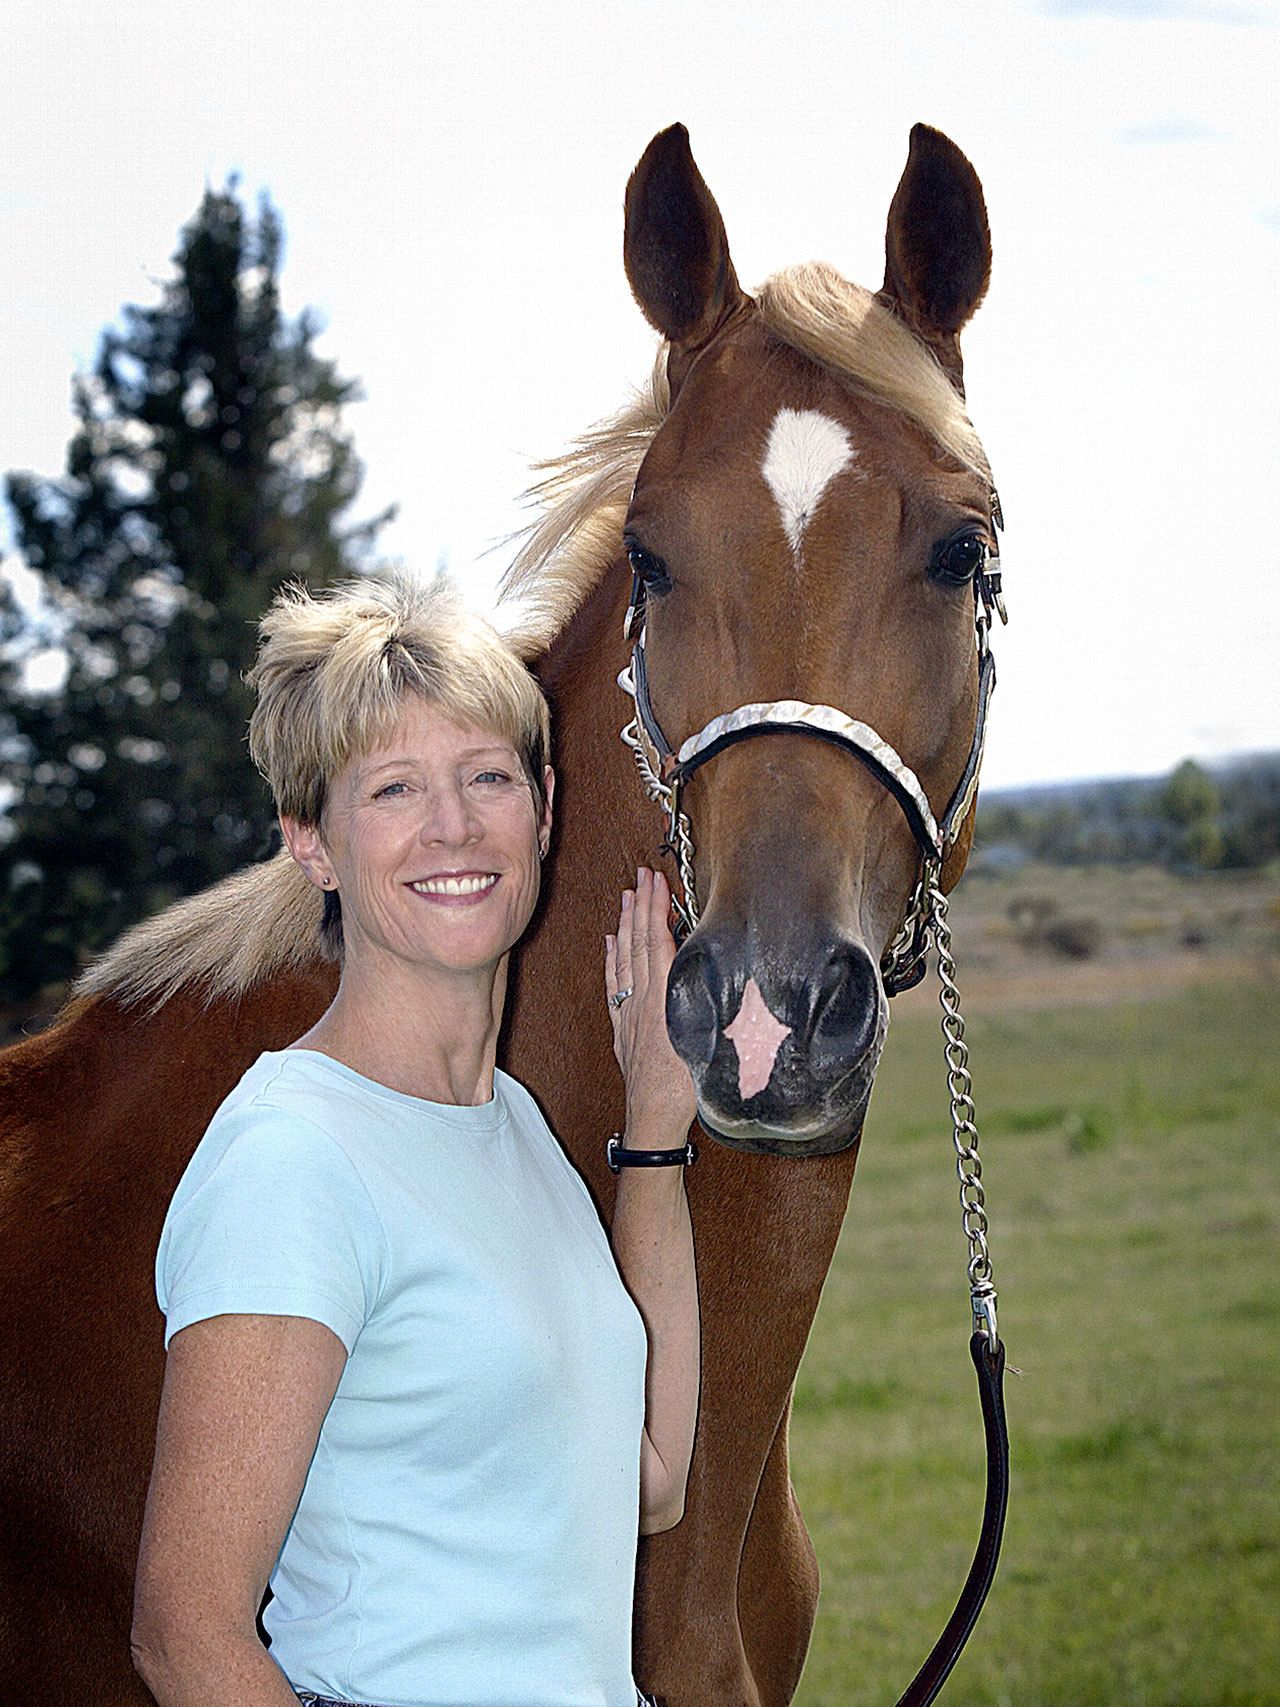 Equestrian author and trail rider Kim McCarrel will talk about her latest book, “Riding Southwest Washington Horse Trails,” at the Jefferson County Library in Port Hadlock on Jan. 18. (Jefferson County Library)